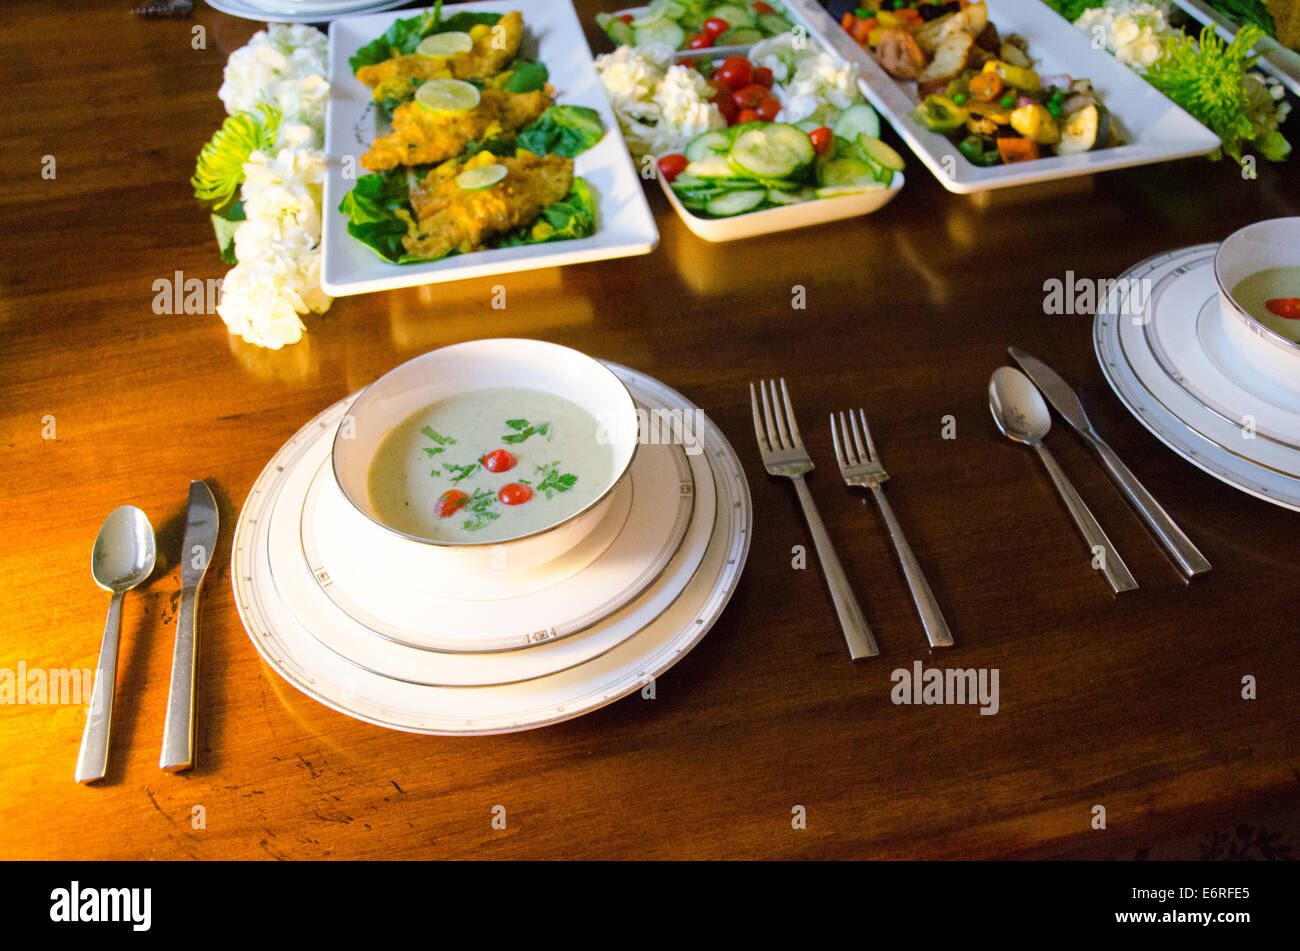 Buffet style dinner party in an elegant setting with soup, fish and vegetables on a wooden dining table with fancy white china Stock Photo